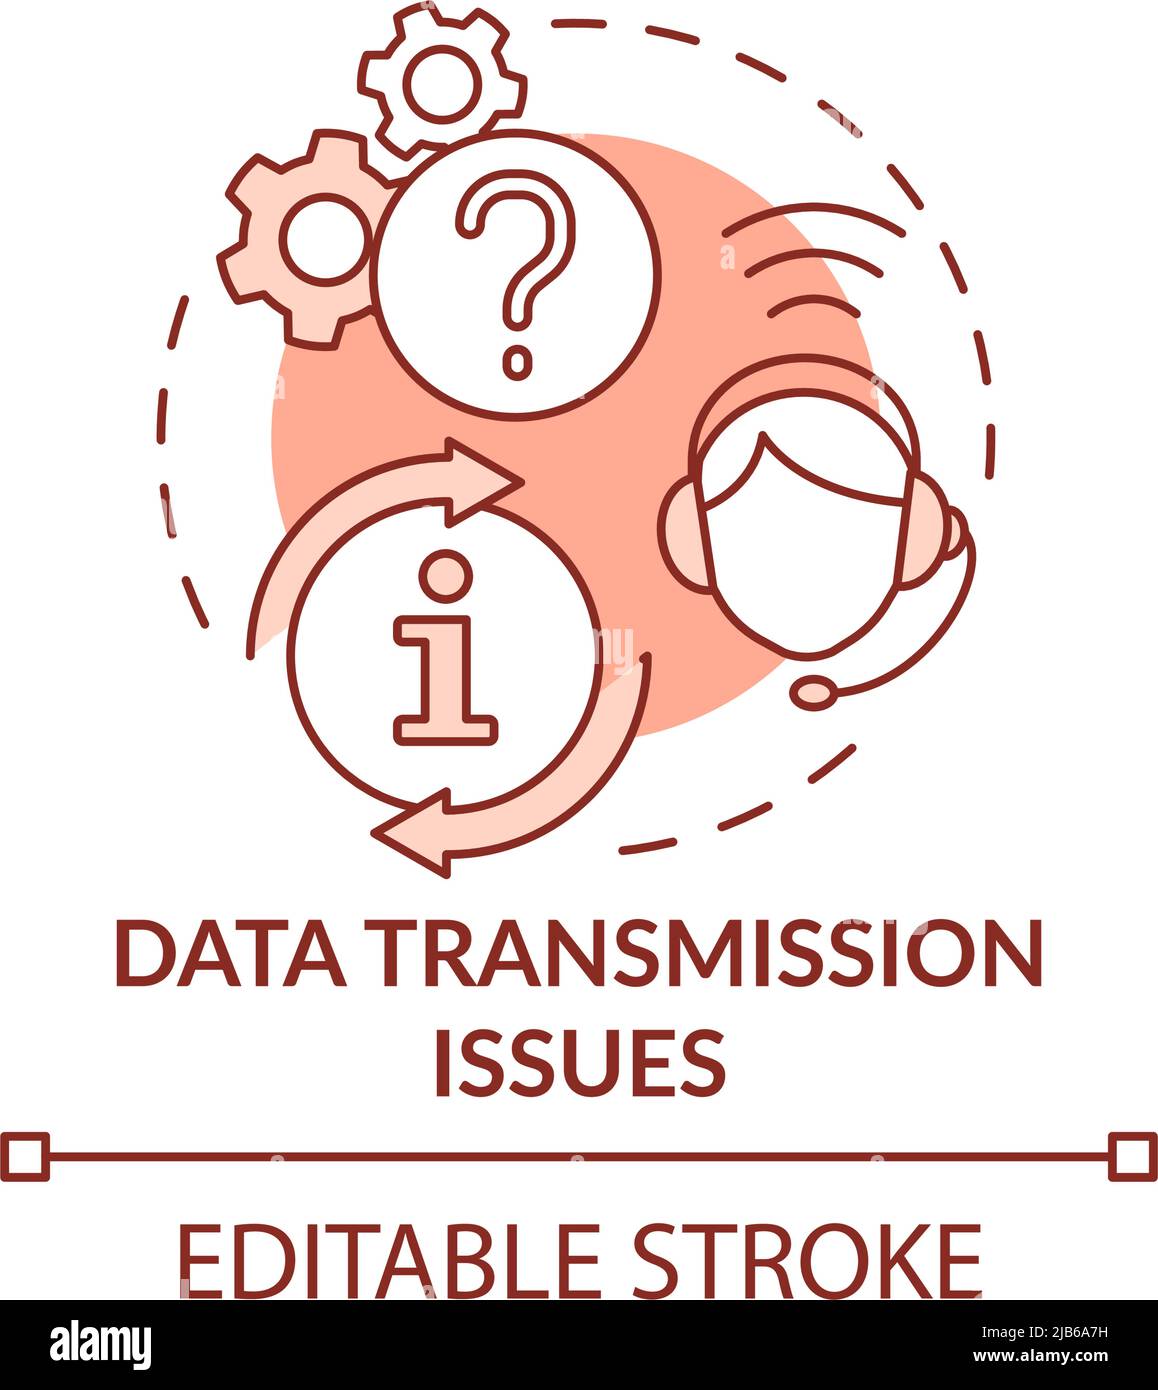 Data transmission issues red concept icon Stock Vector